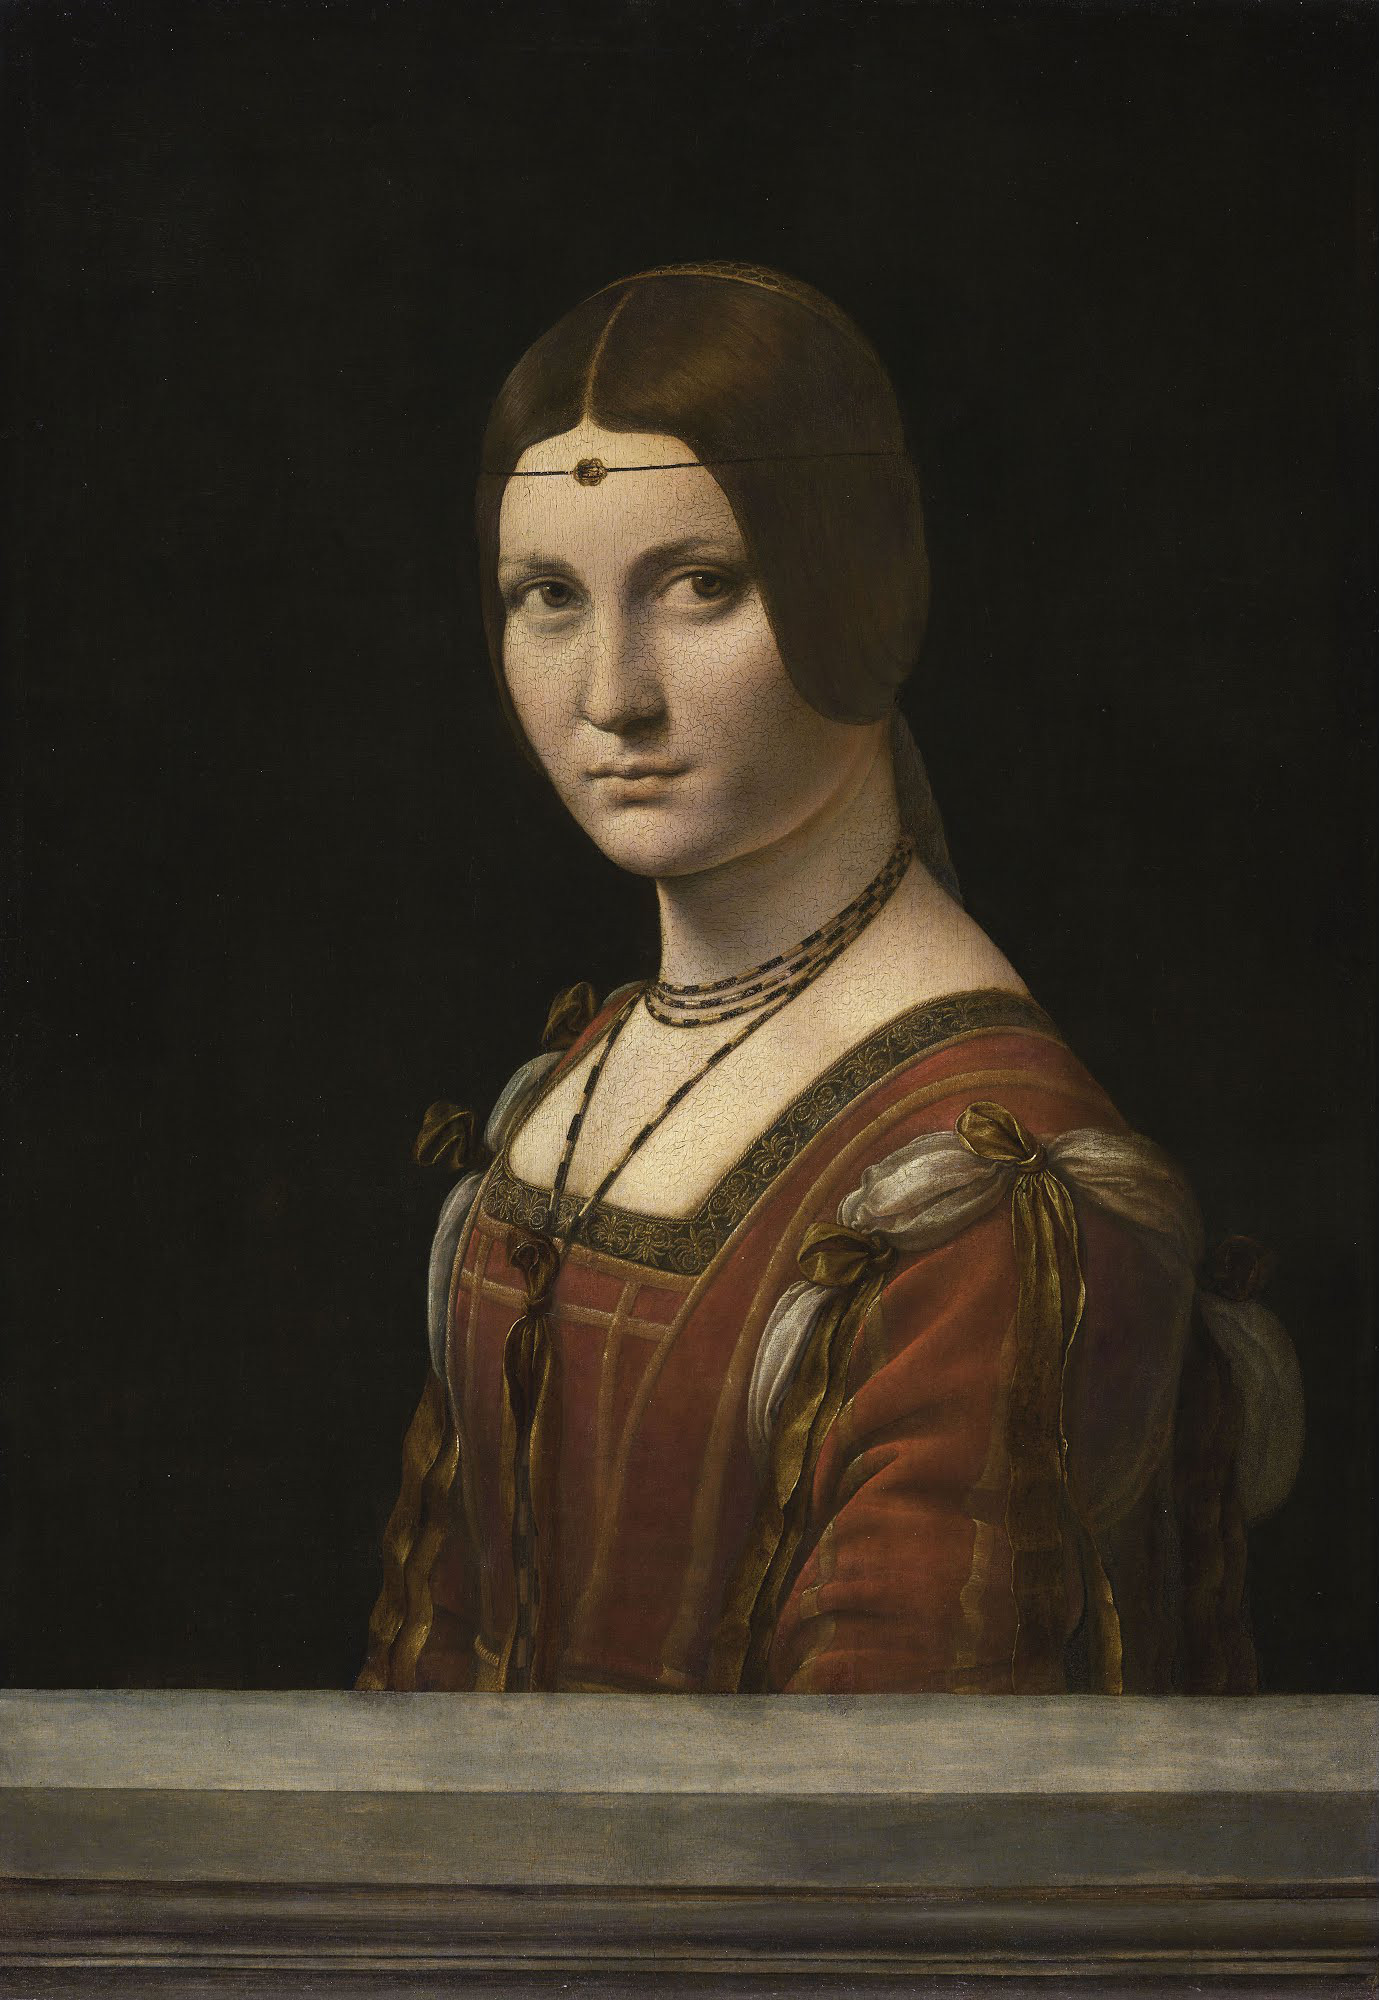 Portrait of an unknown woman, incorrectly known as "La belle Ferronniere"